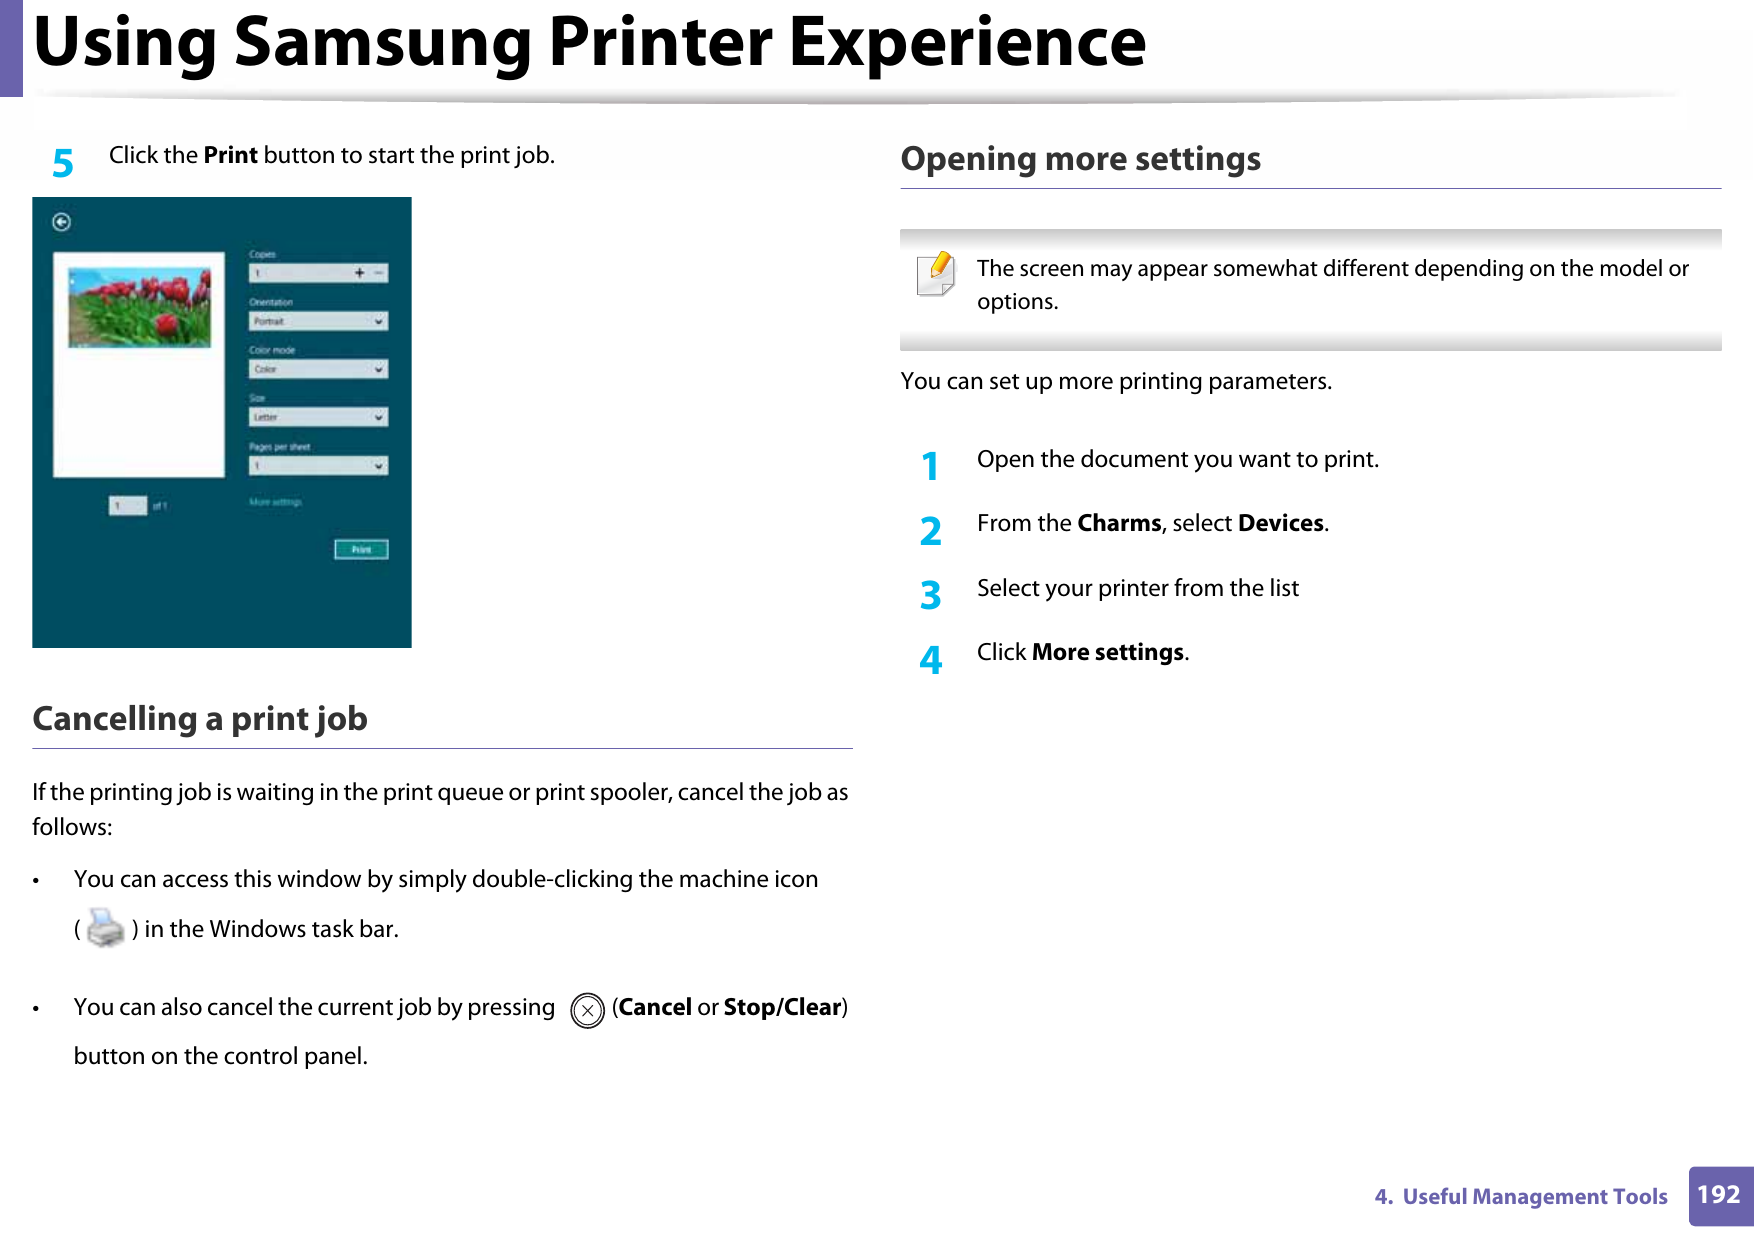 Using Samsung Printer Experience1924.  Useful Management Tools5  Click the Print button to start the print job.Cancelling a print jobIf the printing job is waiting in the print queue or print spooler, cancel the job as follows:• You can access this window by simply double-clicking the machine icon ( ) in the Windows task bar. • You can also cancel the current job by pressing  (Cancel or Stop/Clear) button on the control panel.Opening more settings The screen may appear somewhat different depending on the model or options. You can set up more printing parameters.1Open the document you want to print.2  From the Charms, select Devices.3  Select your printer from the list4  Click More settings.